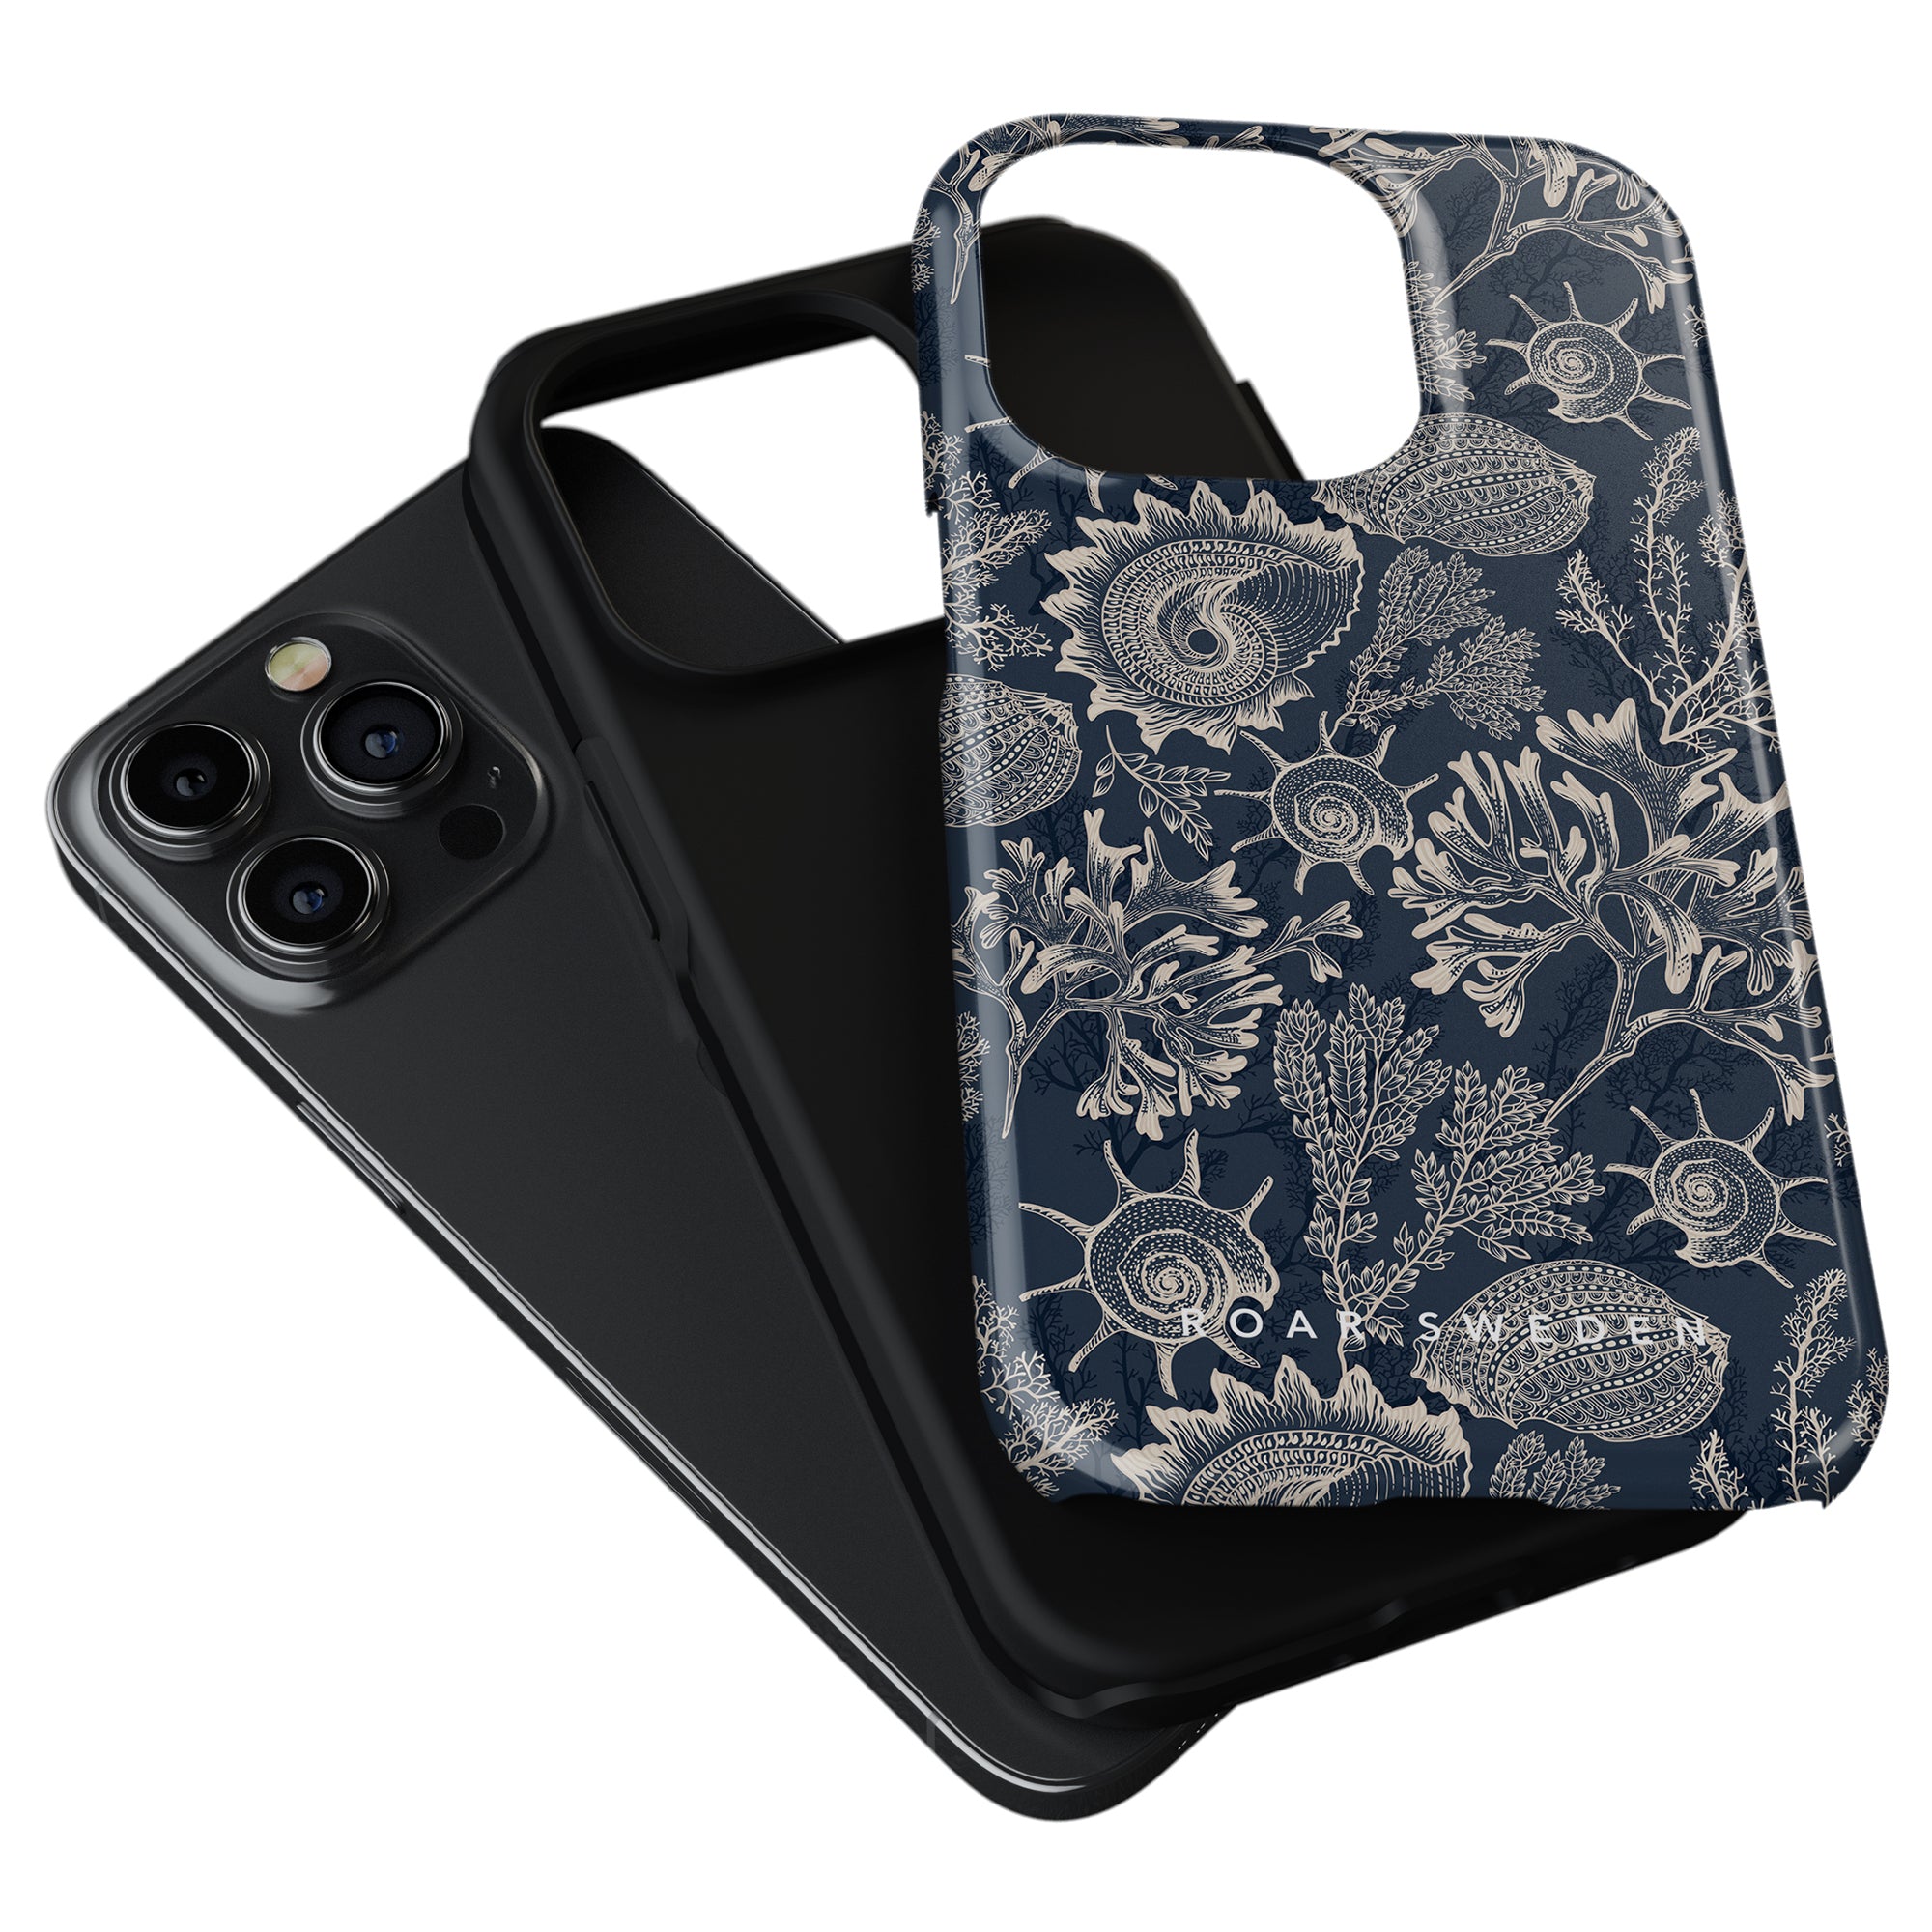 Two Blue Corals - Tough Cases, one with a blue coral design and the other plain black, with cameras visible, isolated on a white background.